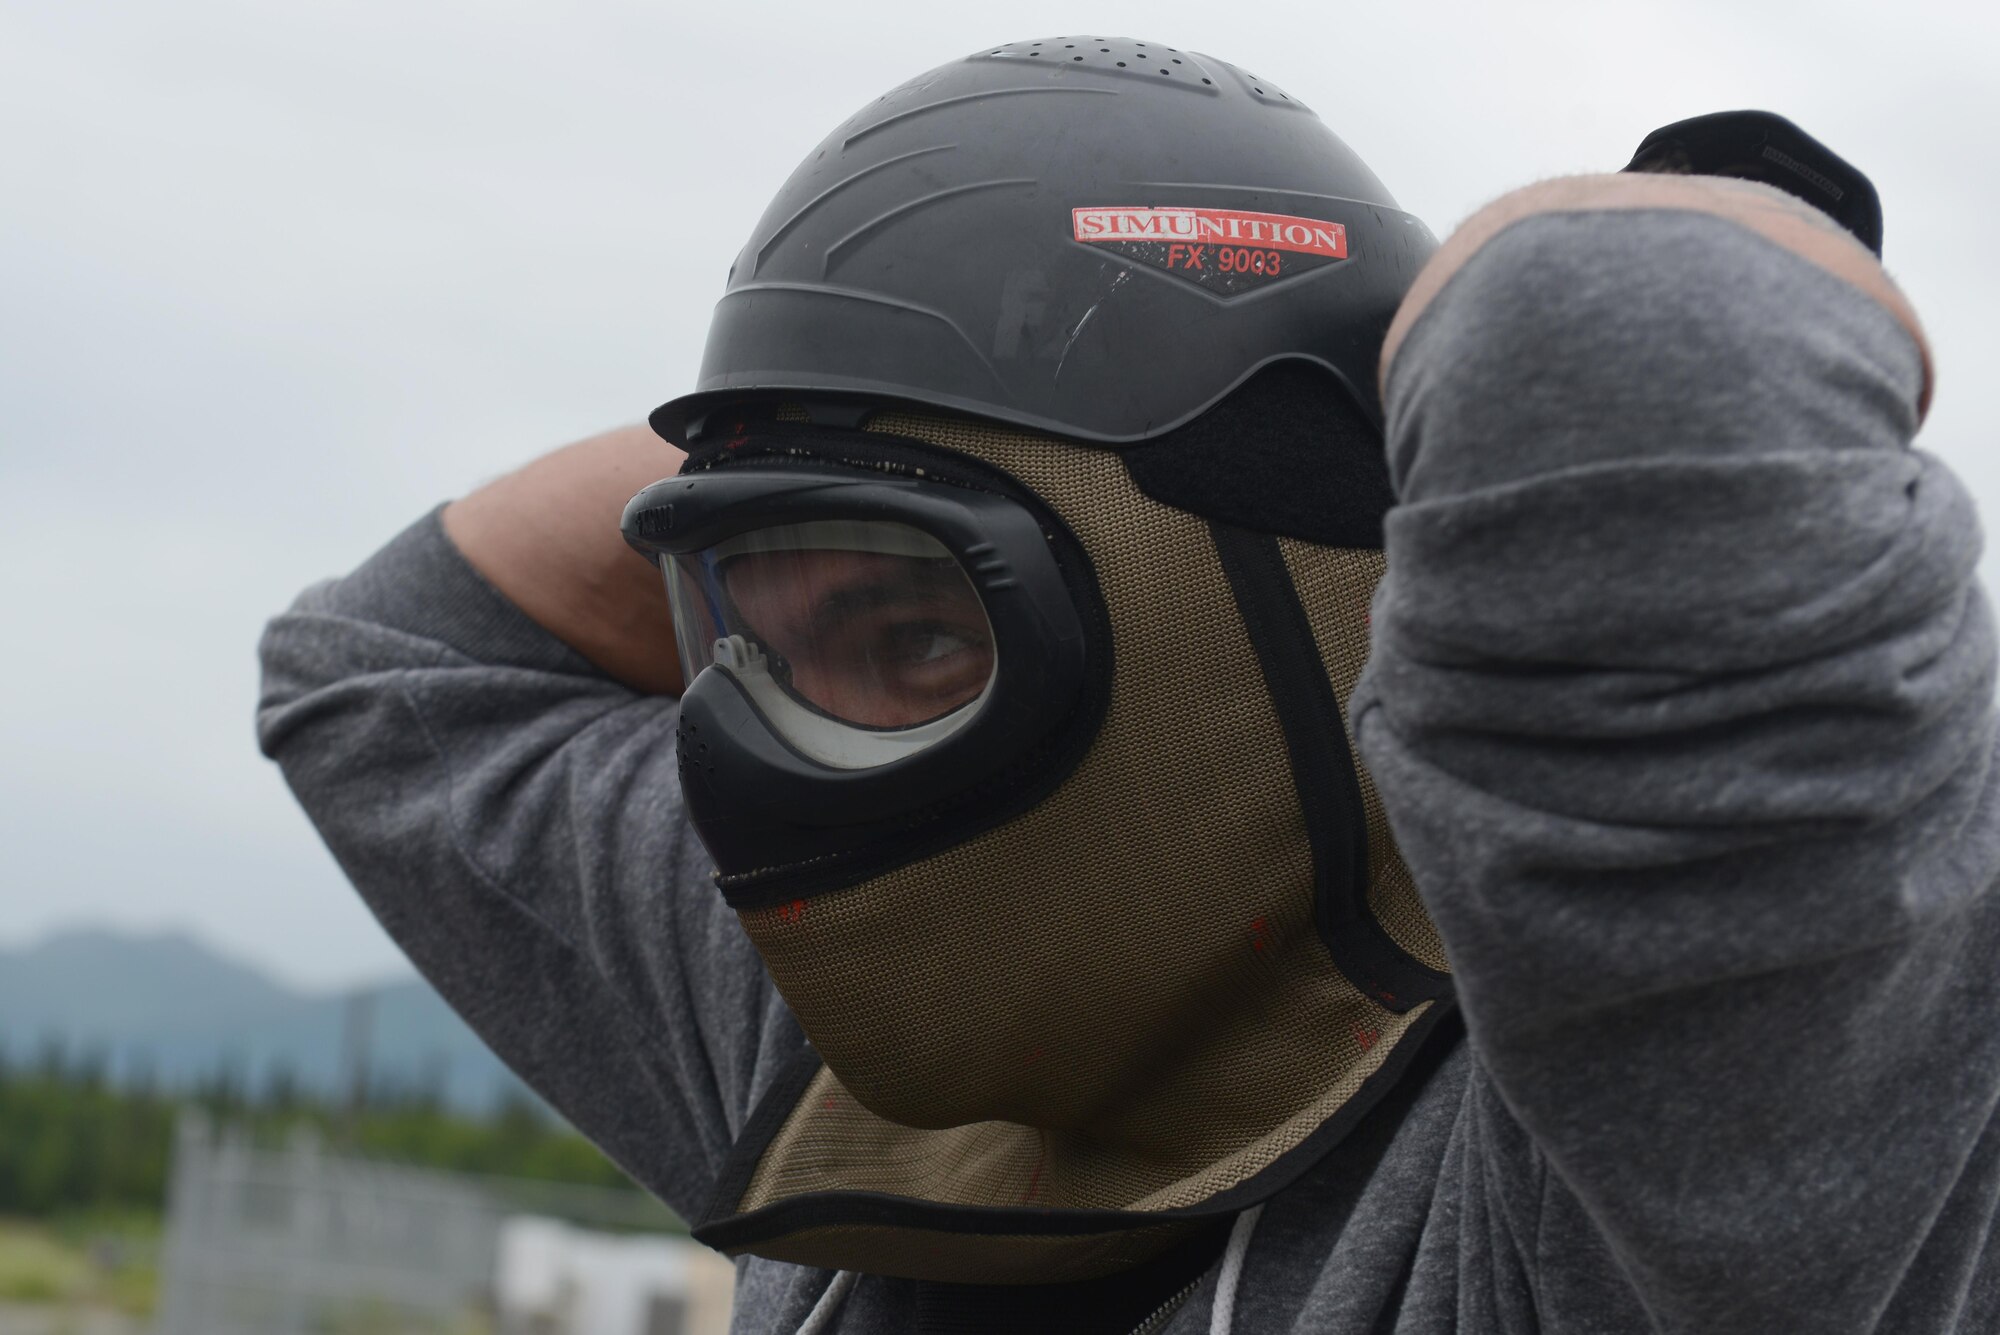 Air Force Staff Sgt. Sean Sullivan, 732nd Aircraft Maintenance Squadron crew chief, dons a protective mask in preparation for 673d Security Forces Squadron active-shooter training at Joint Base Elmendorf-Richardson, Alaska, July 18, 2017. All participants were issued proper protective gear, to include a helmet, neck guard and gloves. 